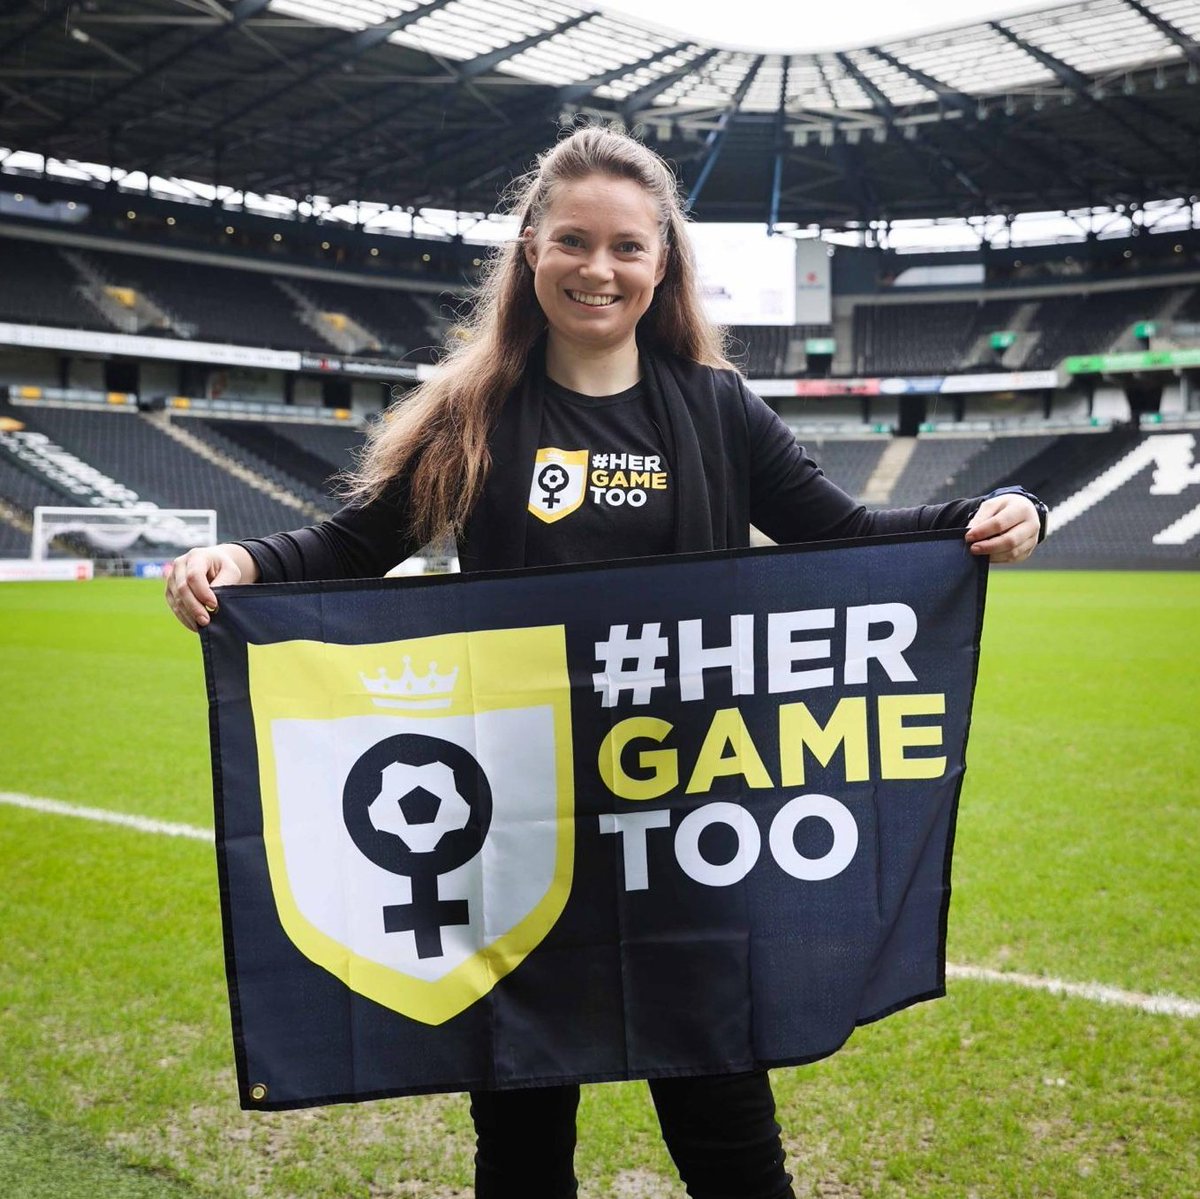 #NewProfilePic Was great to have some photos at Stadium MK @MKDonsFC with my HGT flag. Looking forward to the rest of the season👏 @HerGameToo #HerGameToo